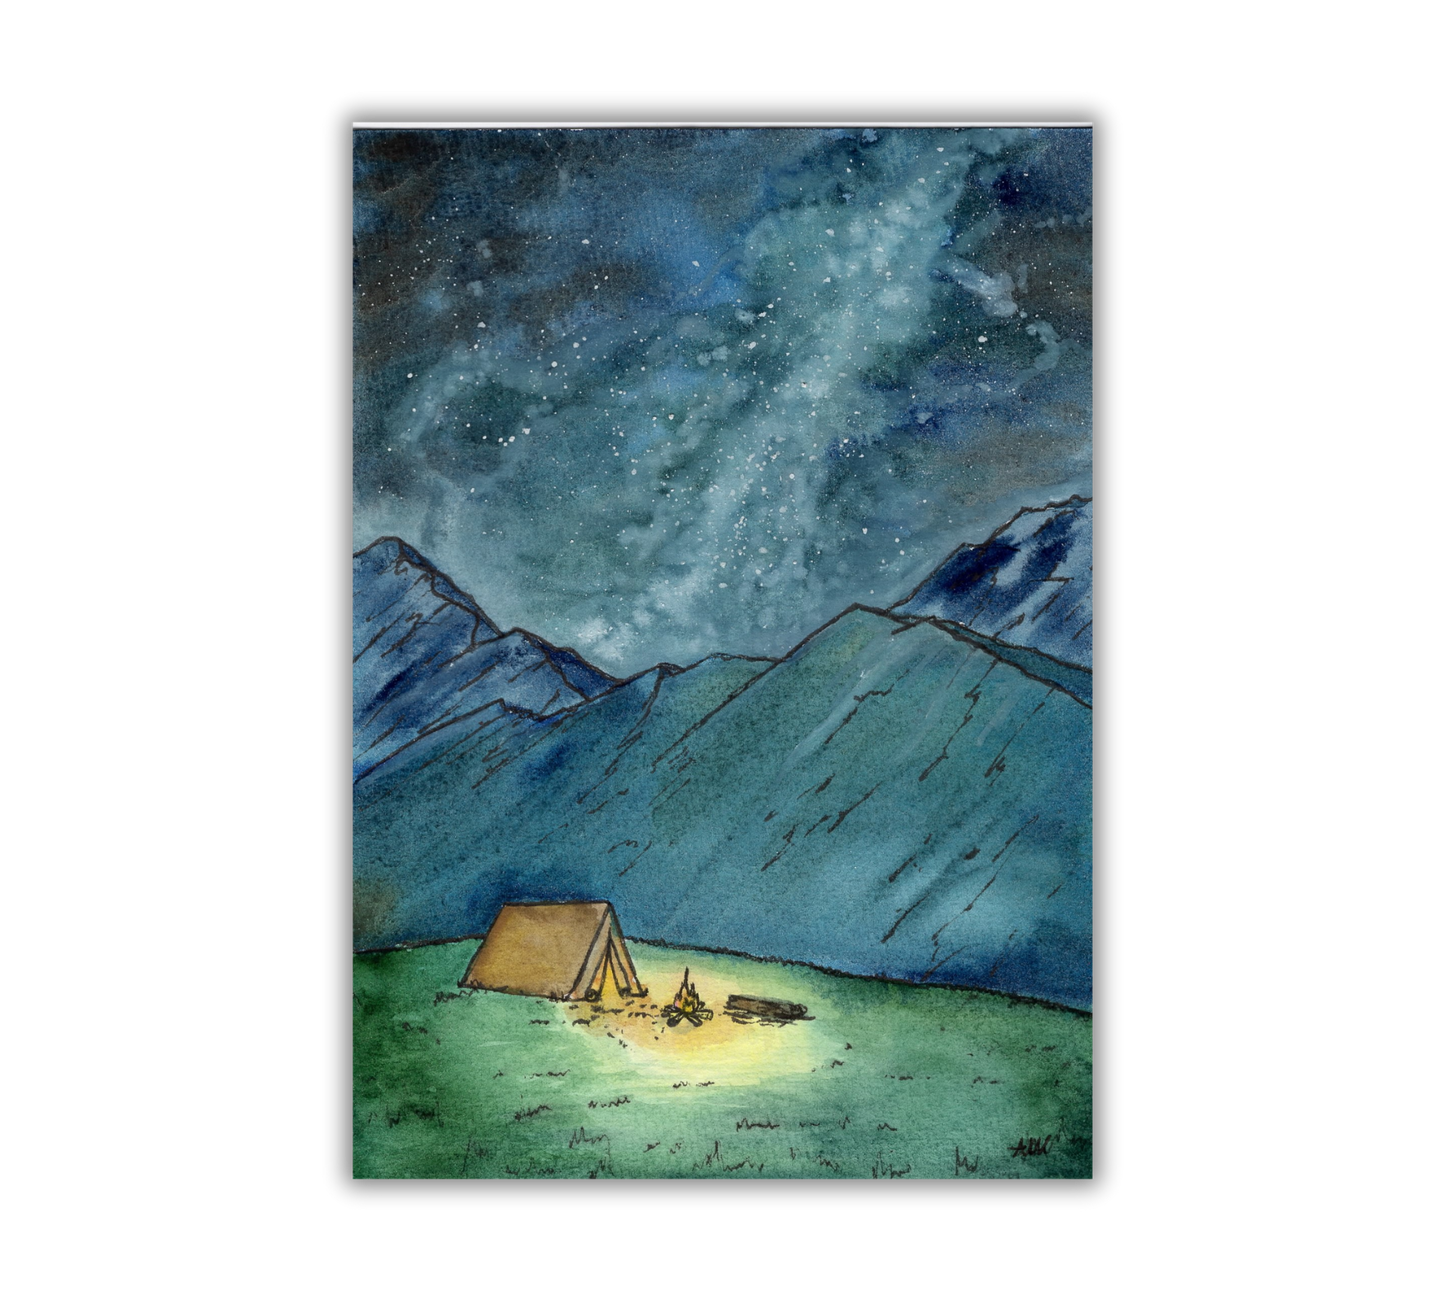 Camping Under the Night Sky in Pen and Watercolor - Archival Quality Art Print